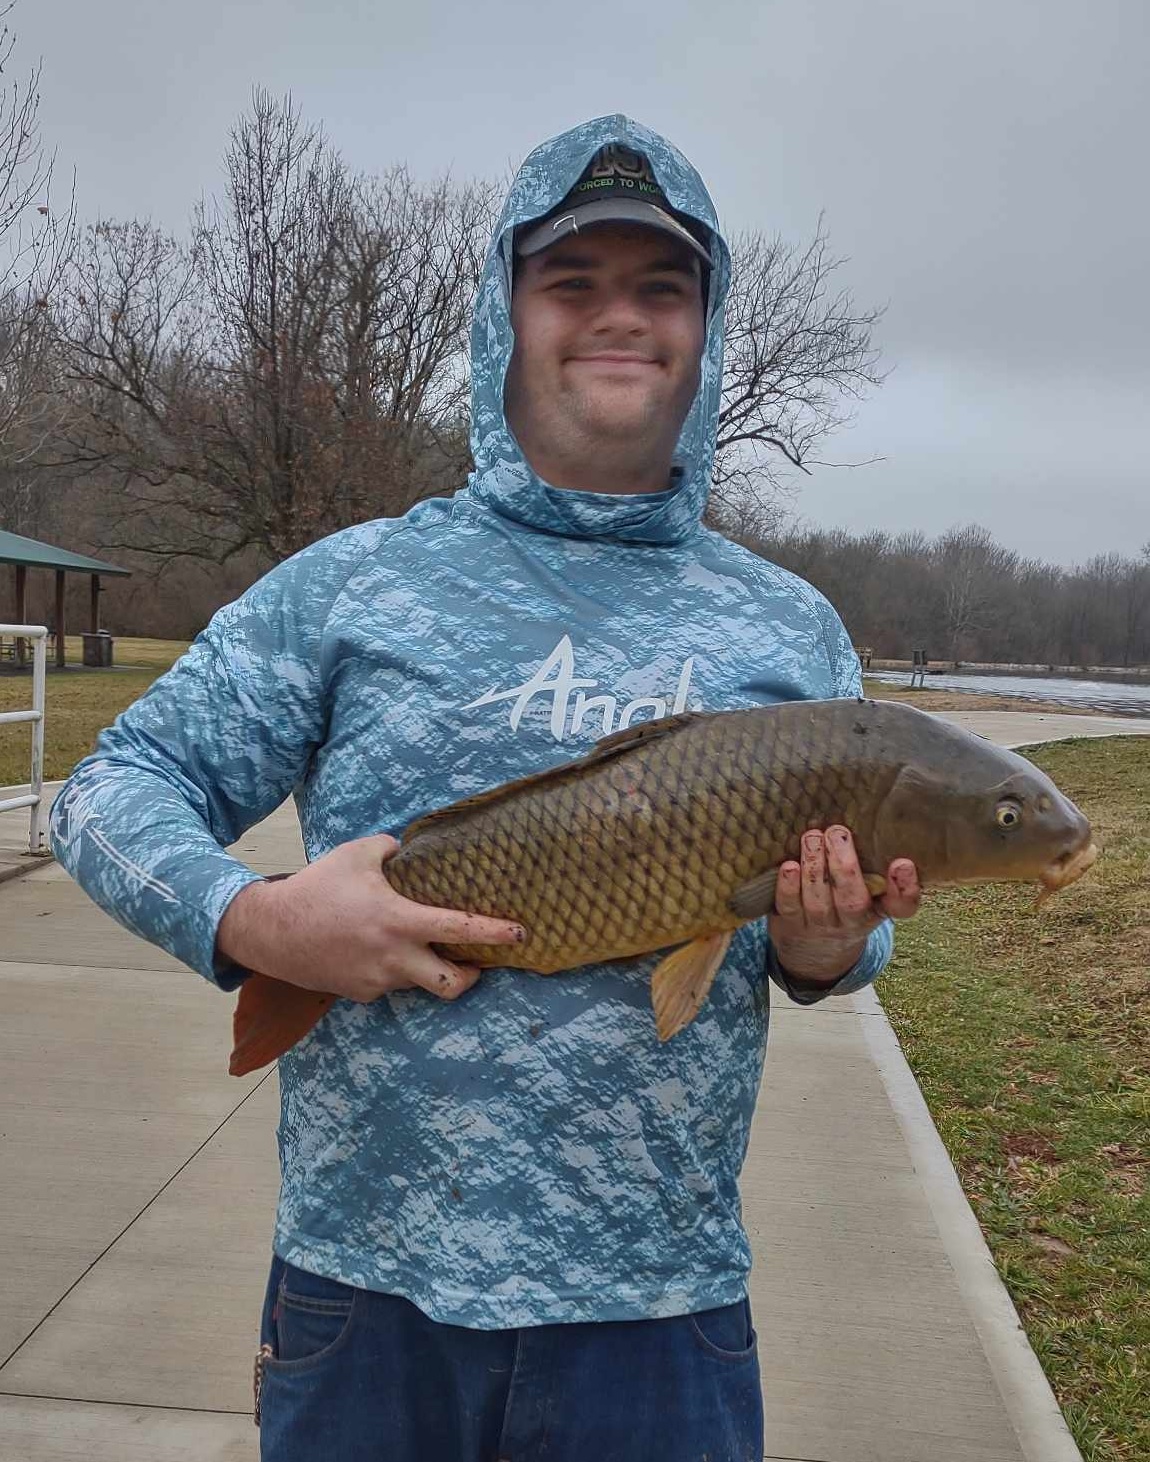 David Moore holding a common carp in front of a pond.